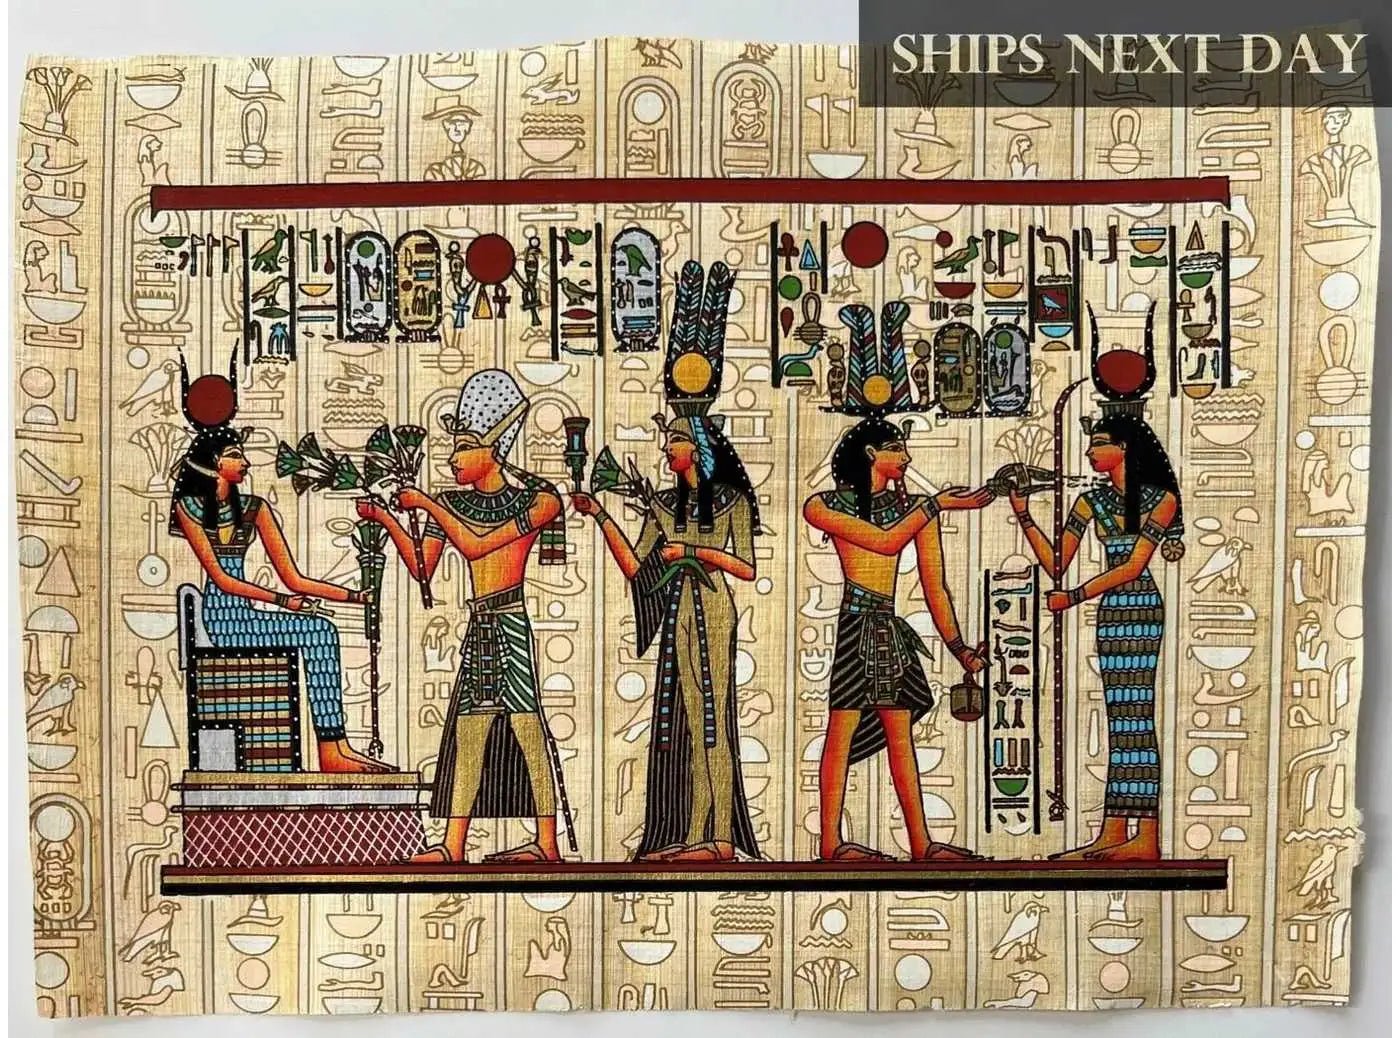 Hieroglyphs Papyrus - Pharaonic Papyrus Painting - Authentic Papyrus Art of Ancient Egypt